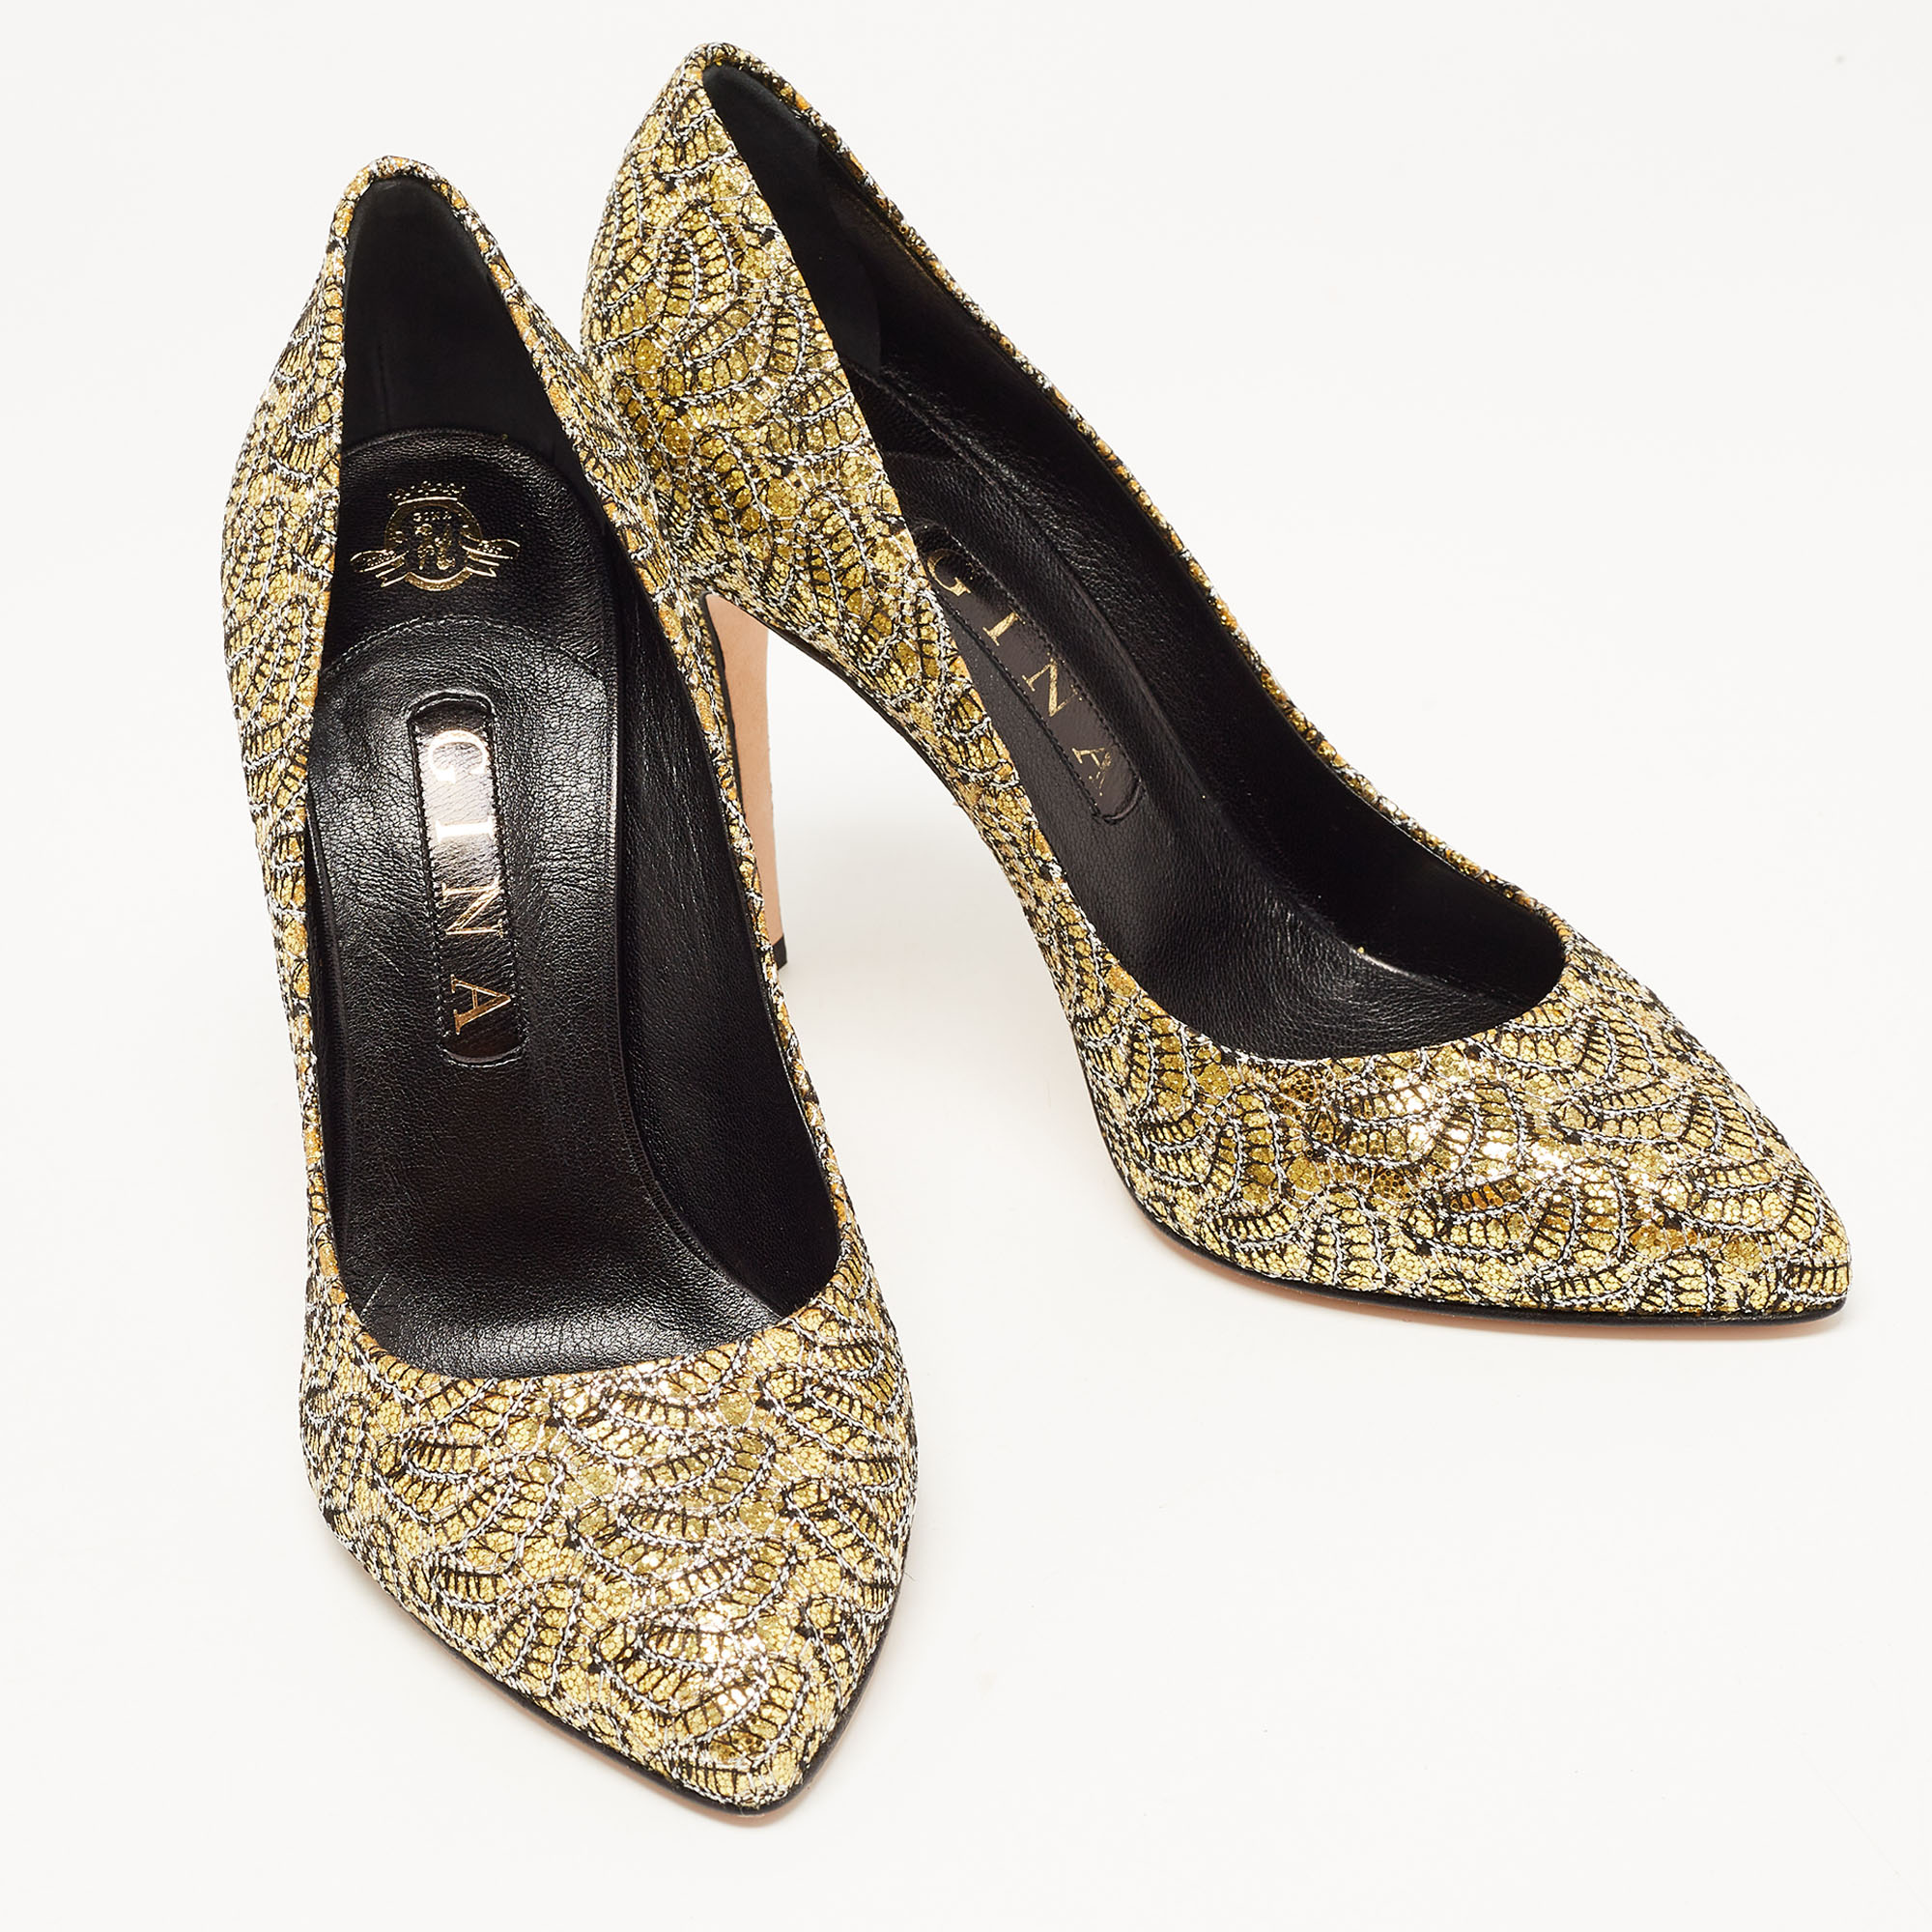 Gina Metallic Gold/Silver Glitter Lace Pointed Toe Pumps Size 40